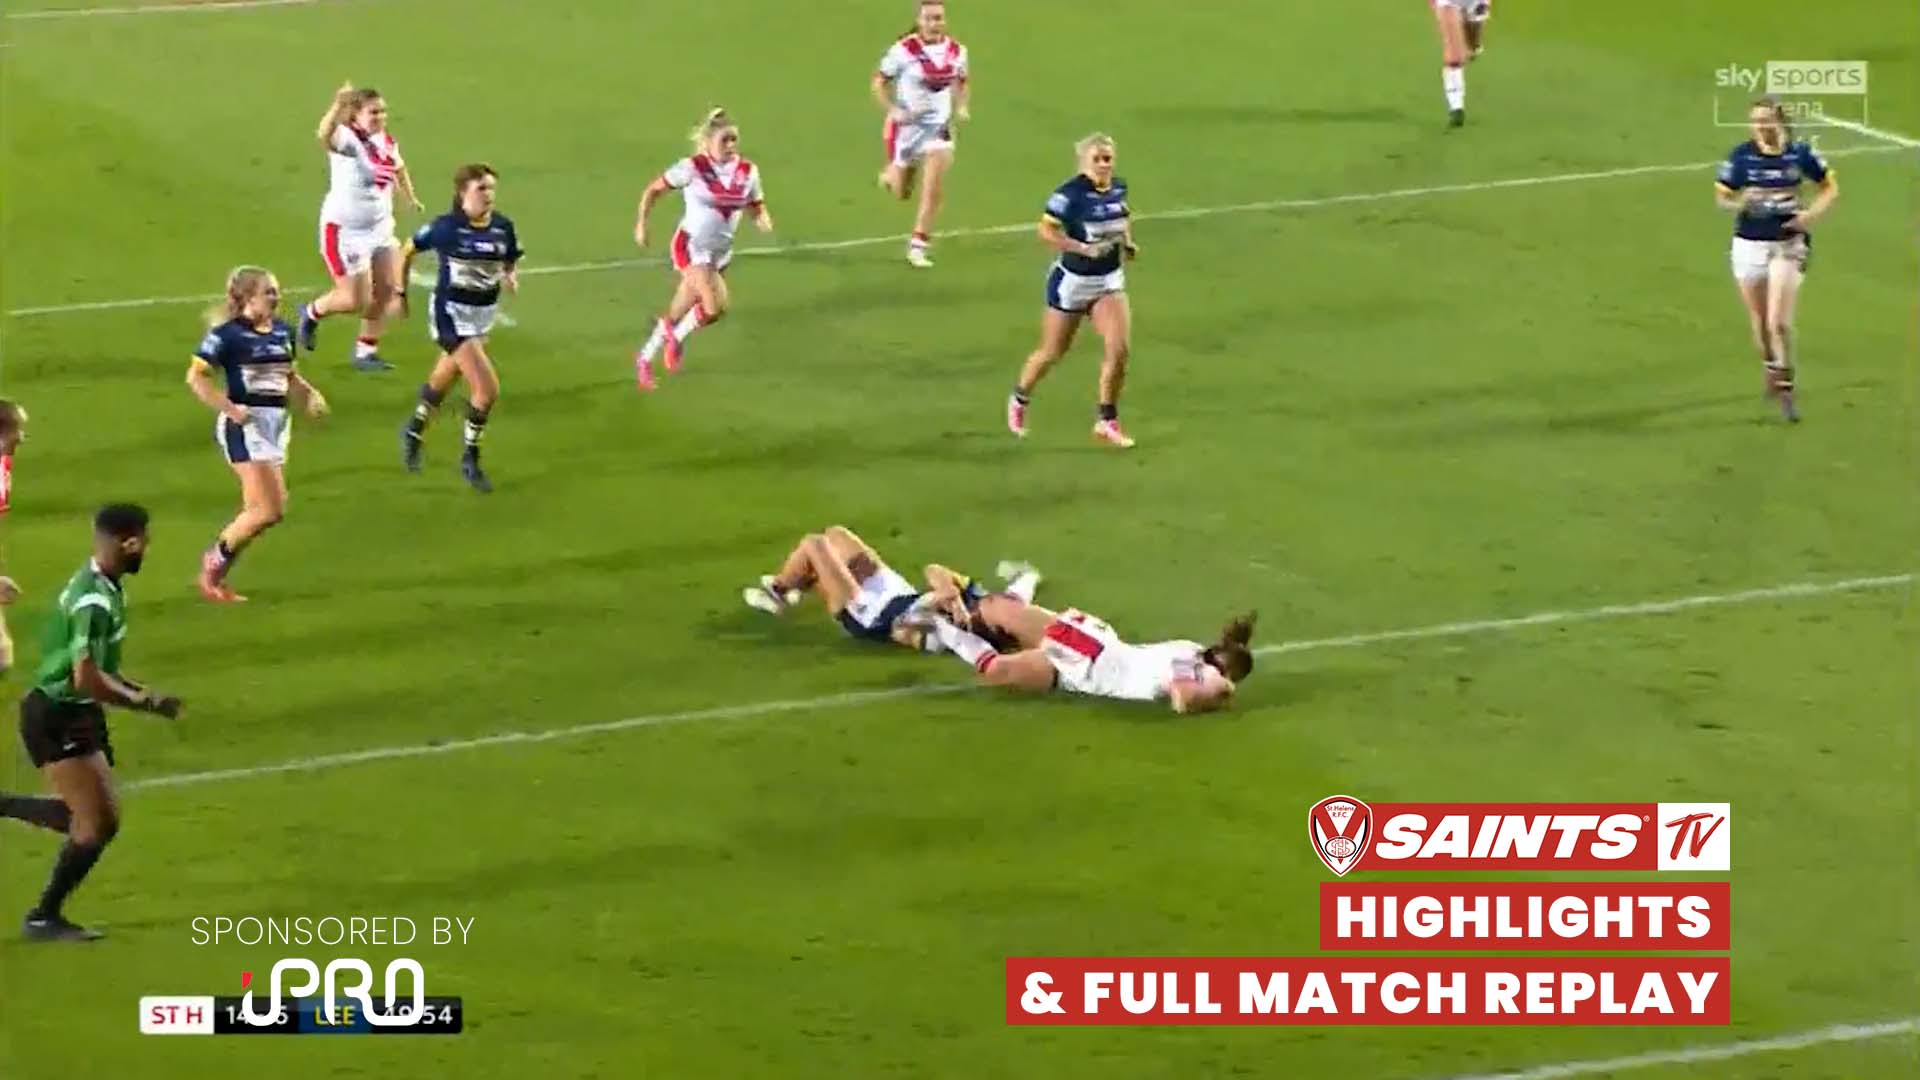 rugby union full match replays 2022